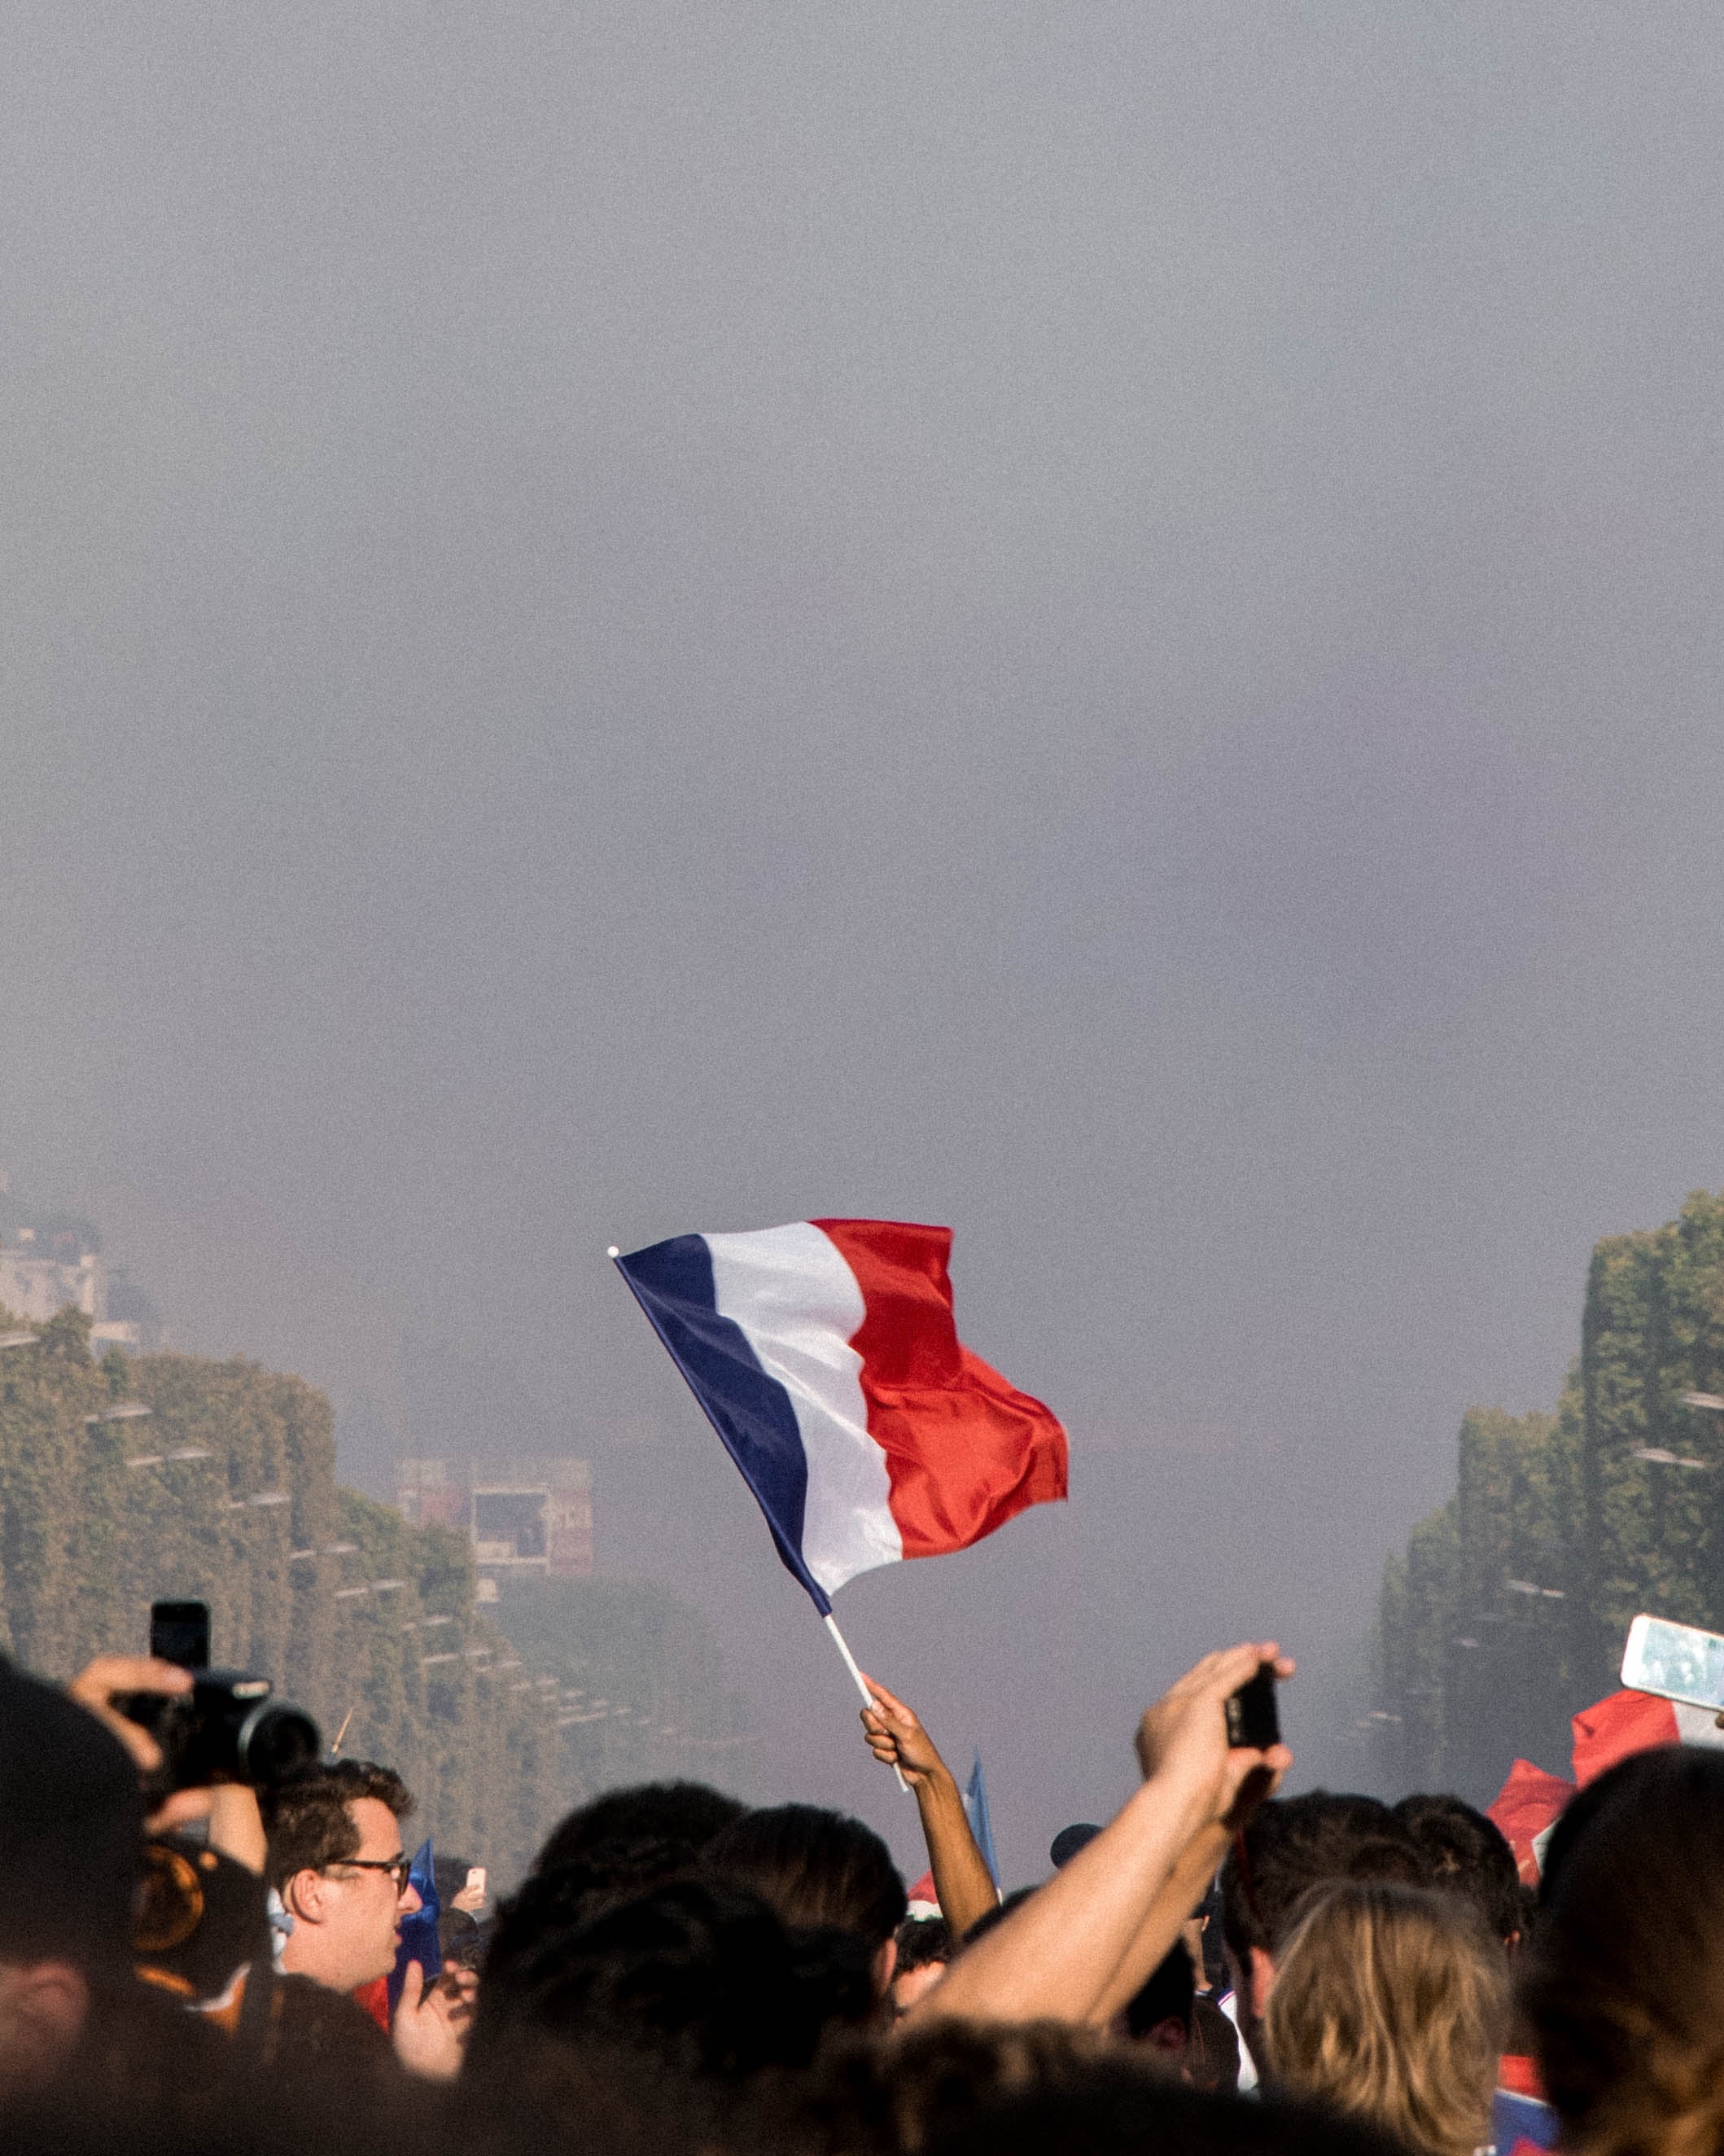 A person waving a french flag in a crowd